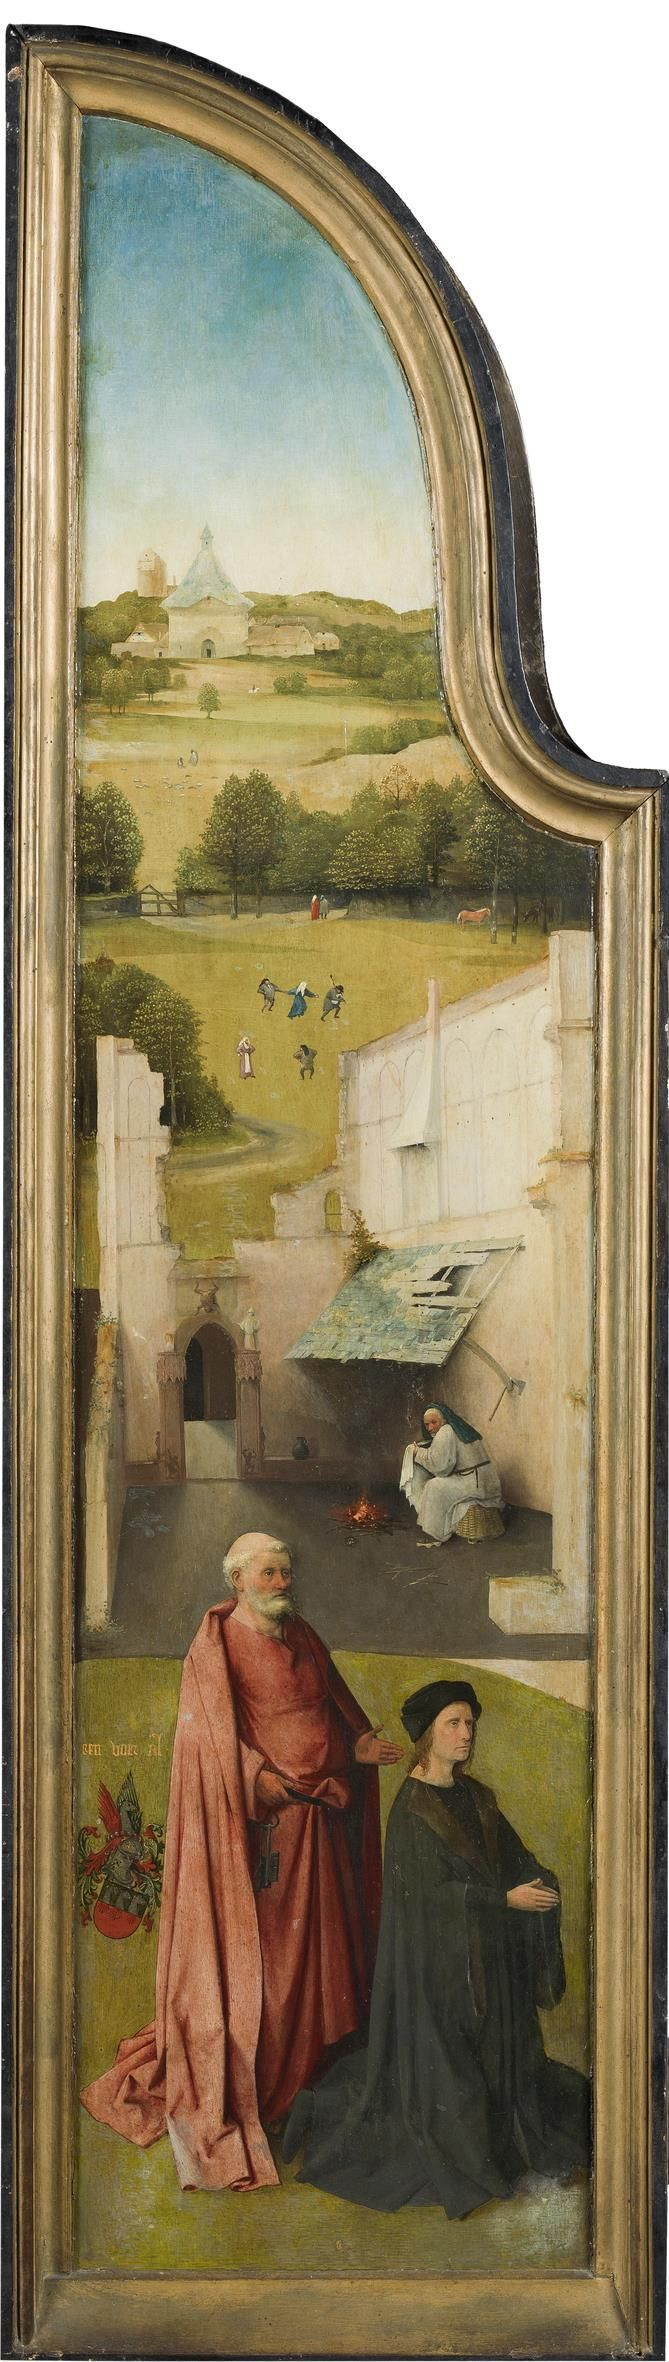 Hieronymus Bosch. St Peter with the donor. Triptych the adoration of the Magi. Left wing